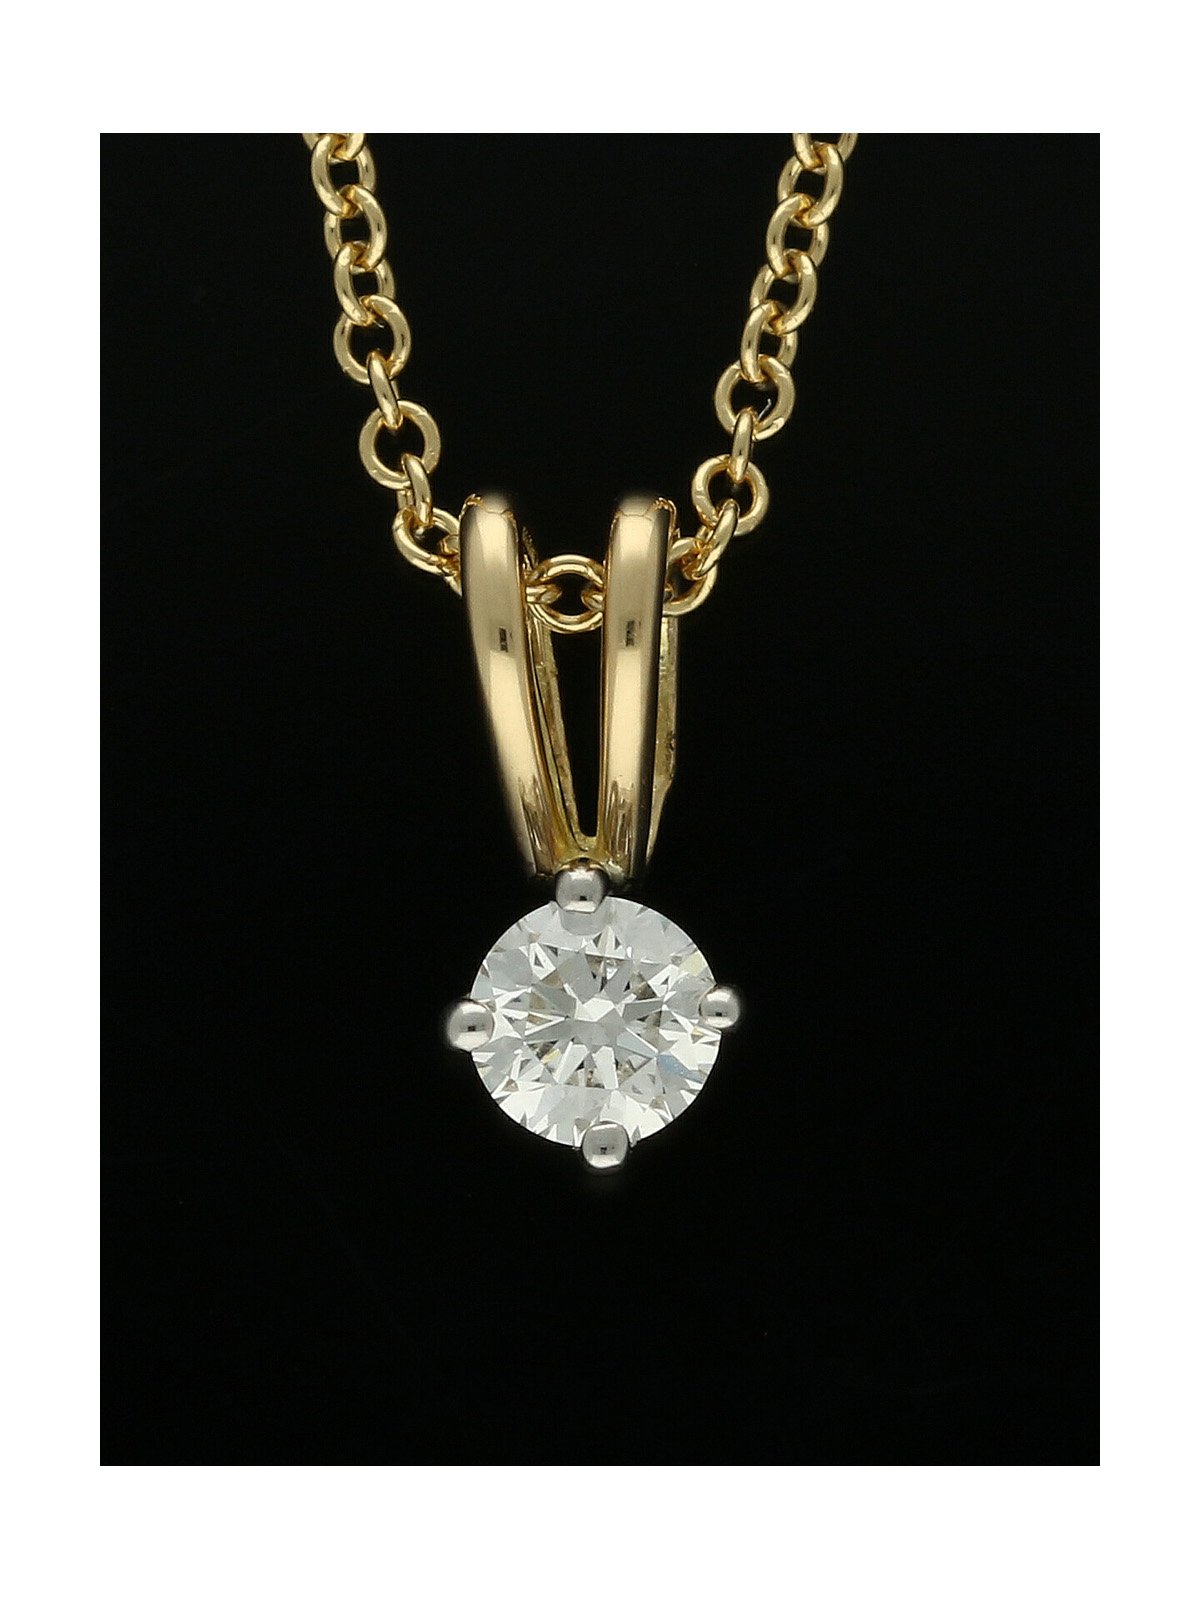 Diamond Solitaire Pendant "The Catherine Collection" 0.20ct Round Brilliant Cut in 18ct Yellow Gold